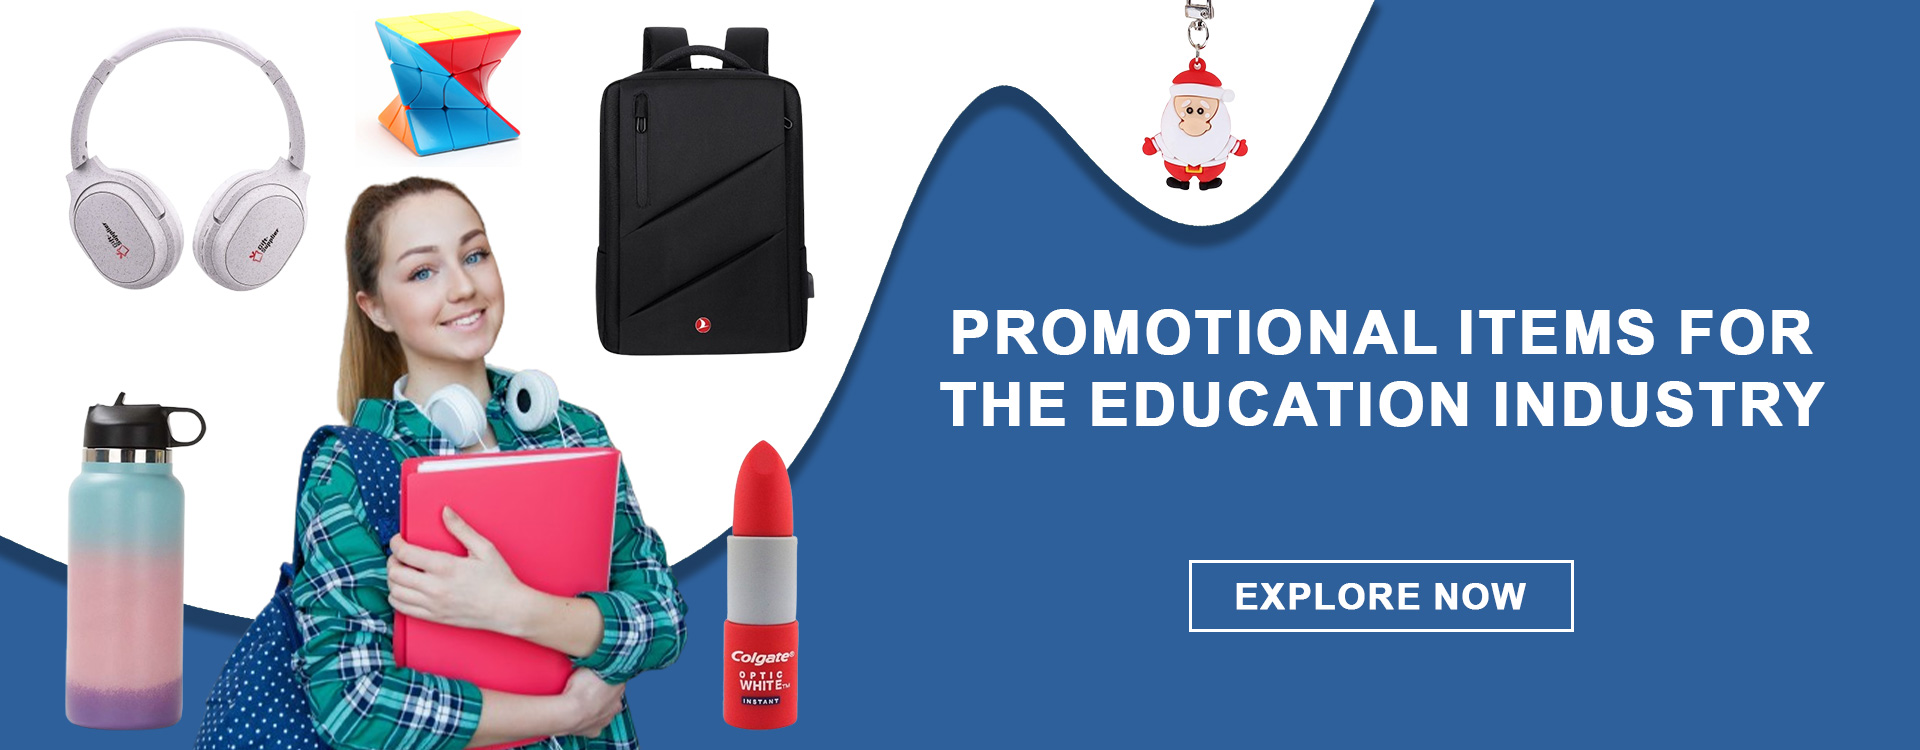 Promotional Items for the Education Industry